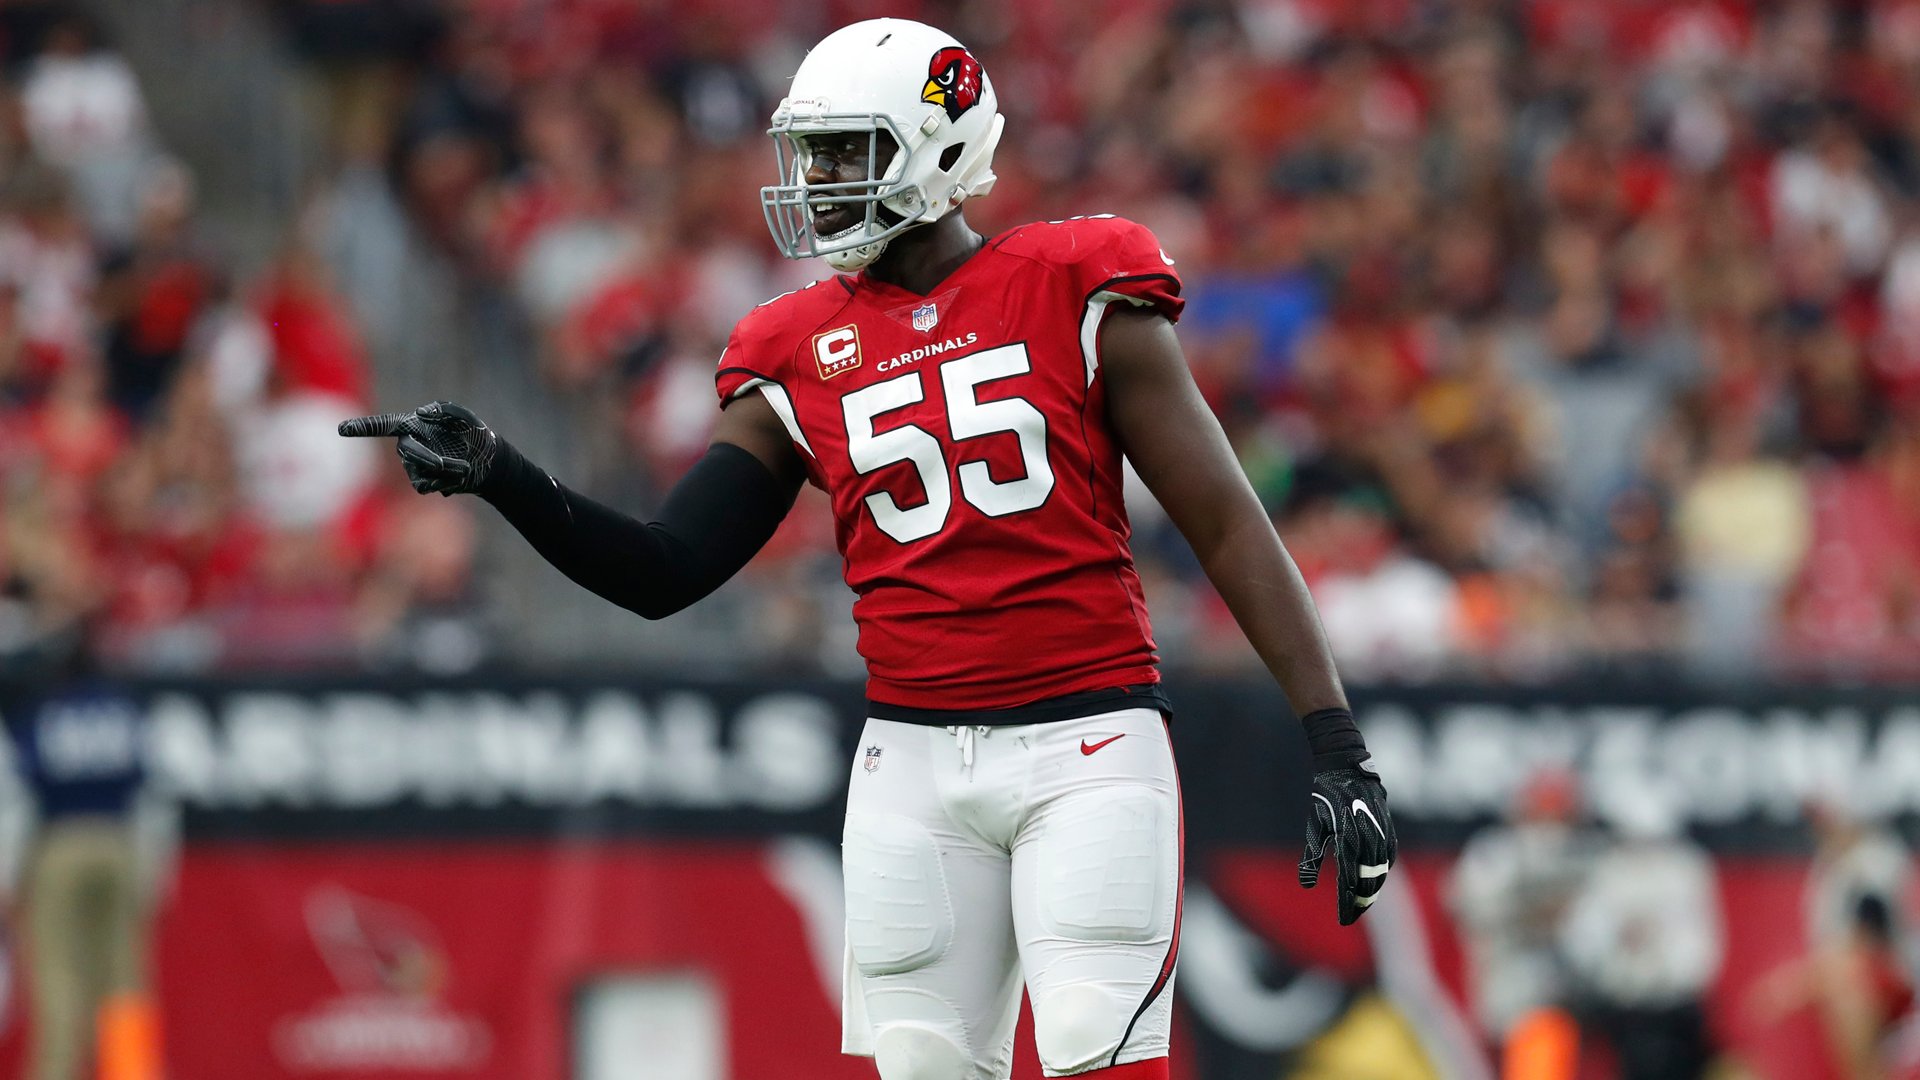 Raiders will have hands full with Chandler Jones, Cardinals' pass